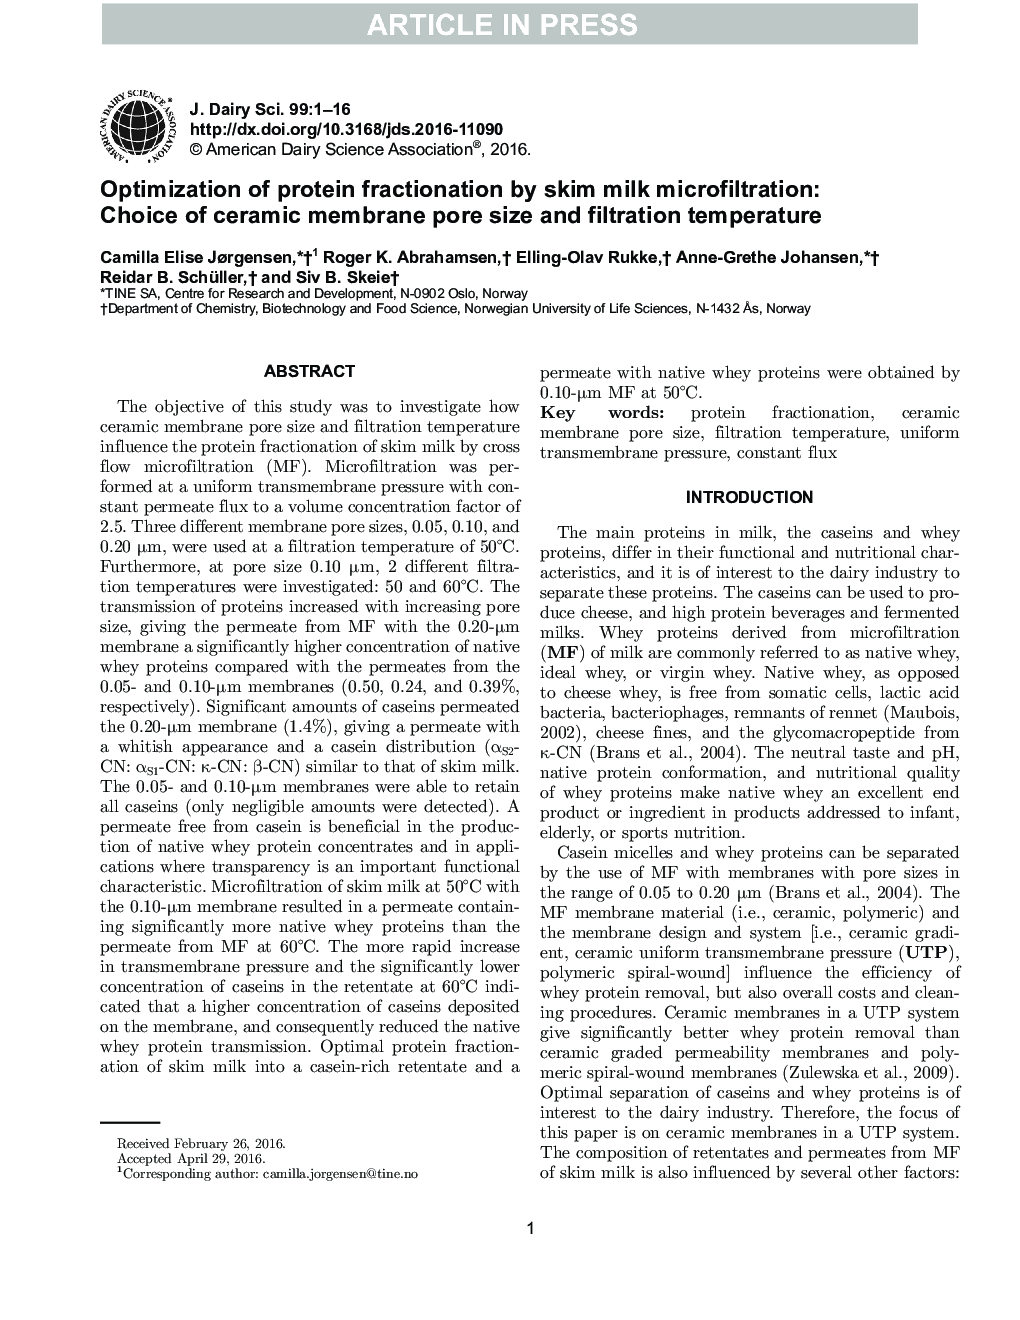 Optimization of protein fractionation by skim milk microfiltration: Choice of ceramic membrane pore size and filtration temperature